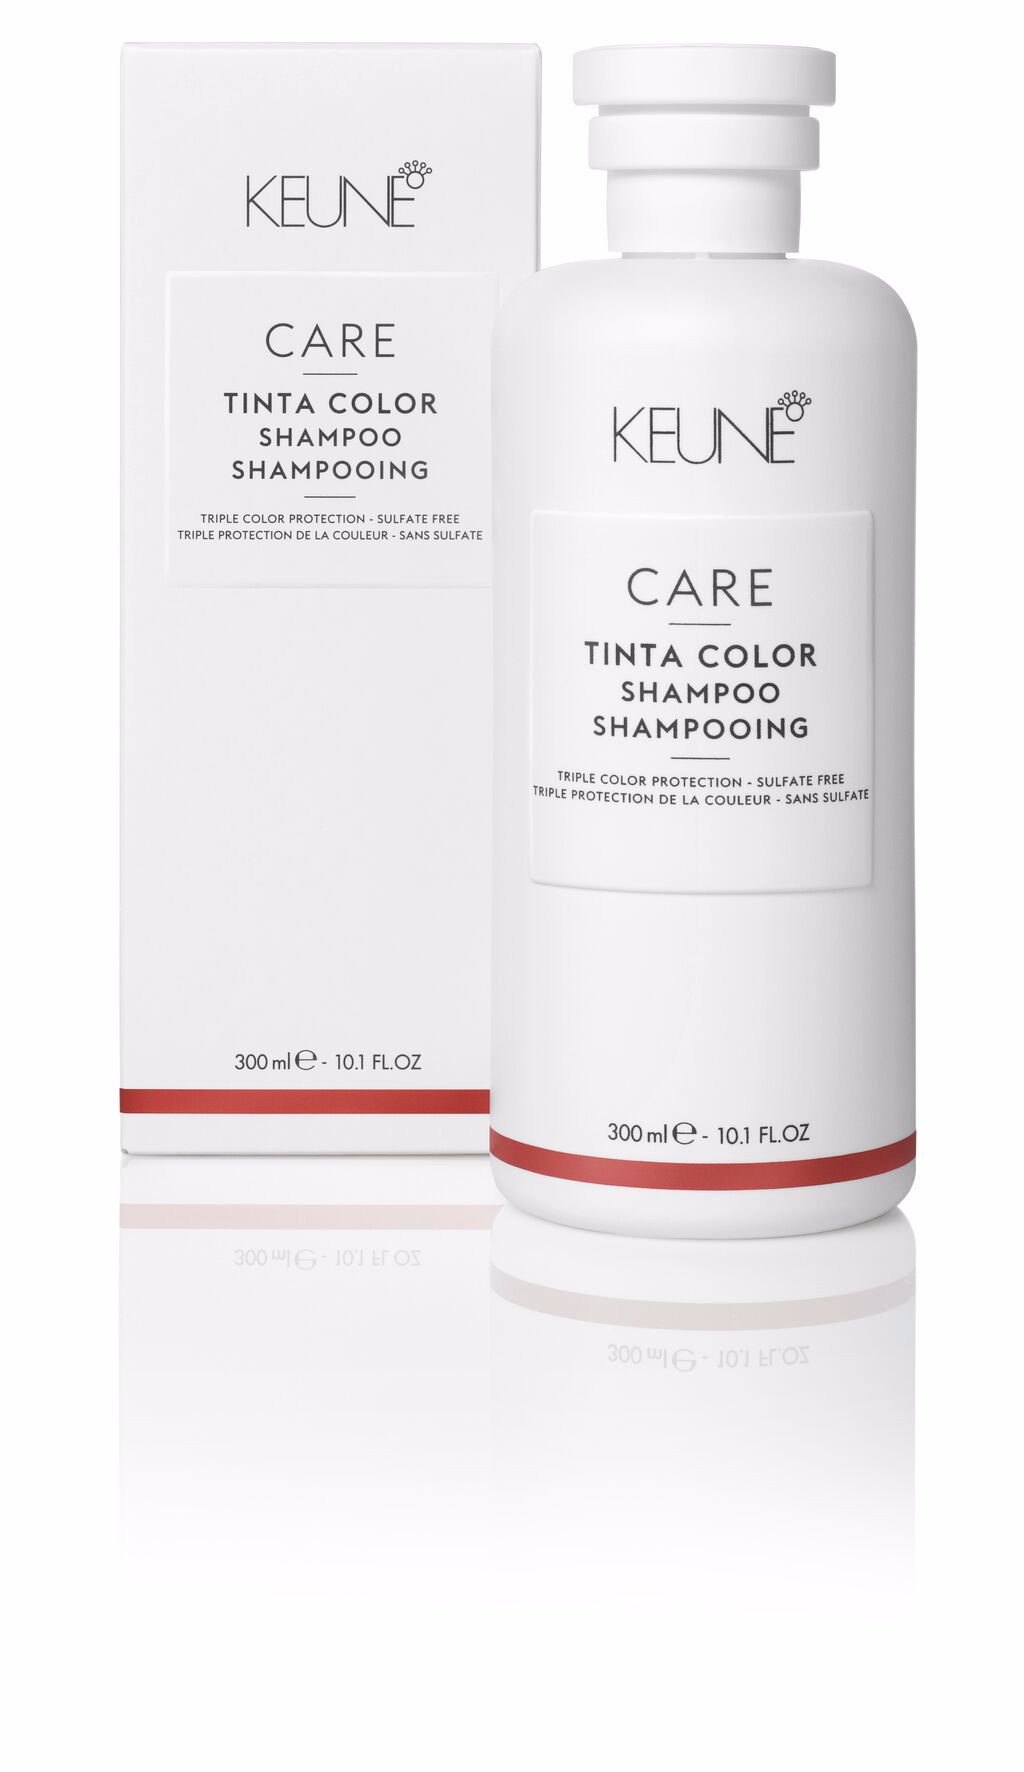 Try professional hair care for colored hair with Tinta Color Care Shampoo. Anti-Frizz, more volume, and preserved salon color. Gluten-free shampoo. Discover now on keune.ch.